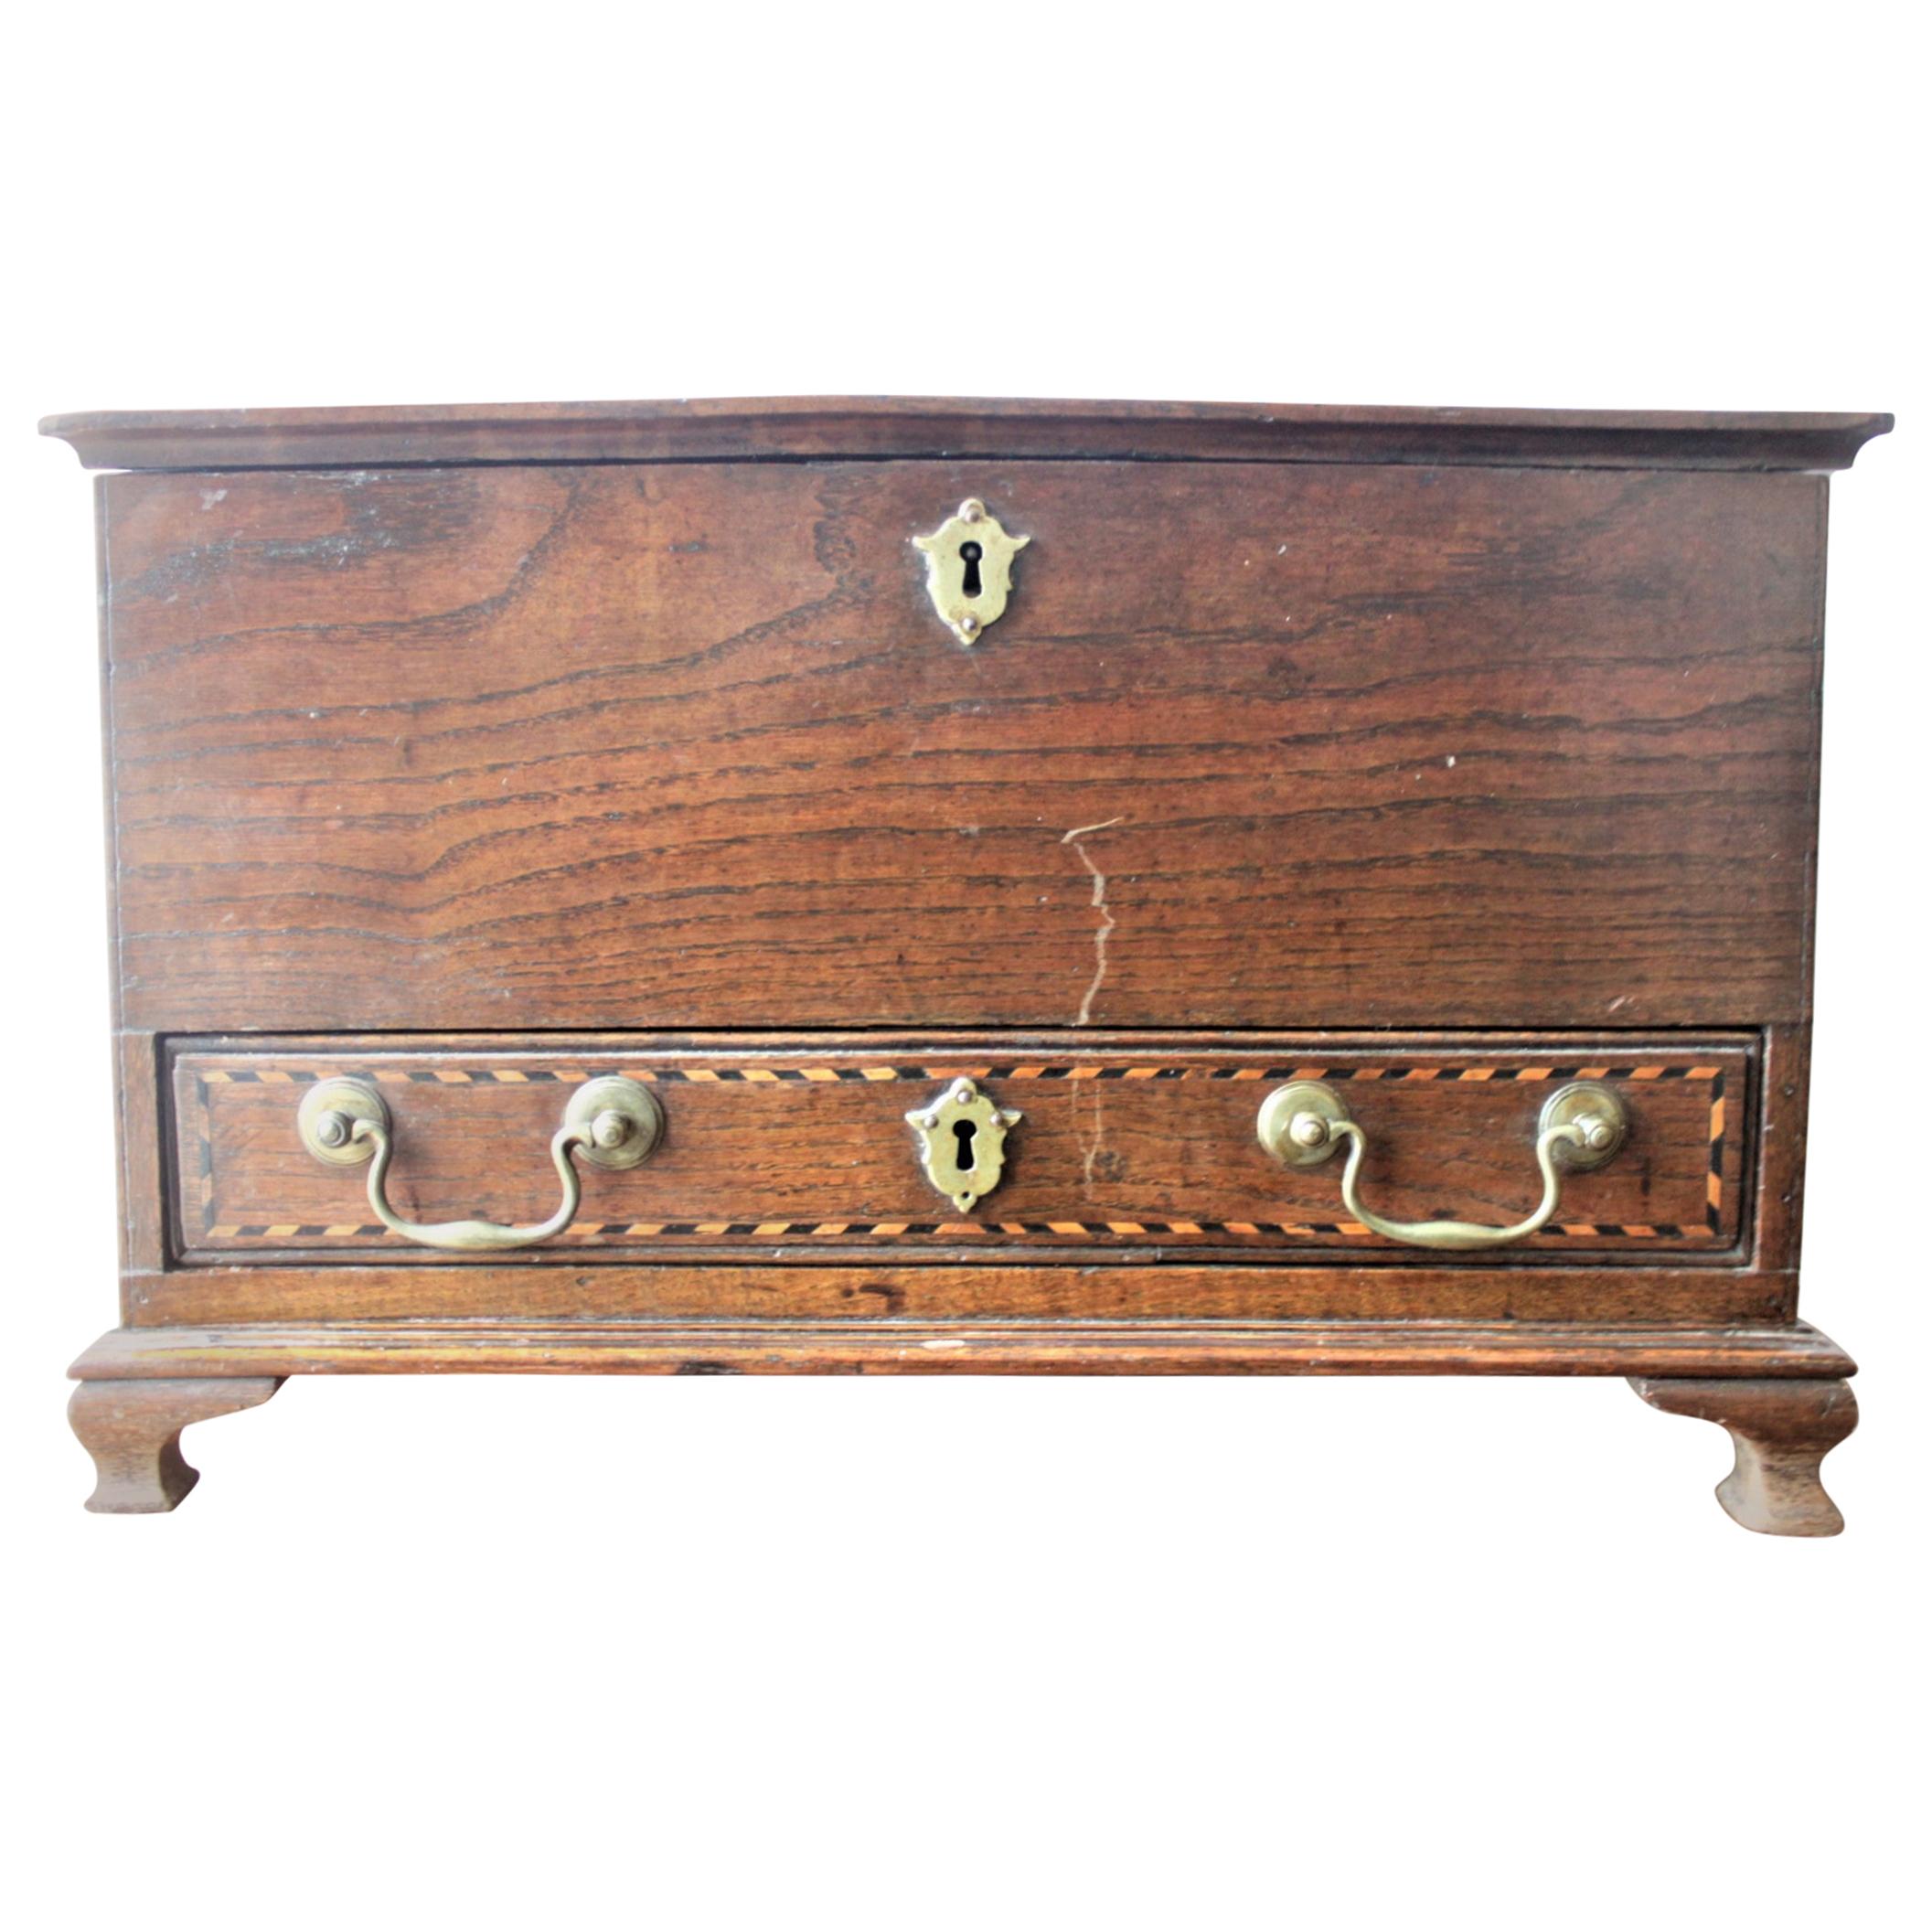 Antique English Handcrafted Wedding or Apprentice Chest or Box with Drawer For Sale